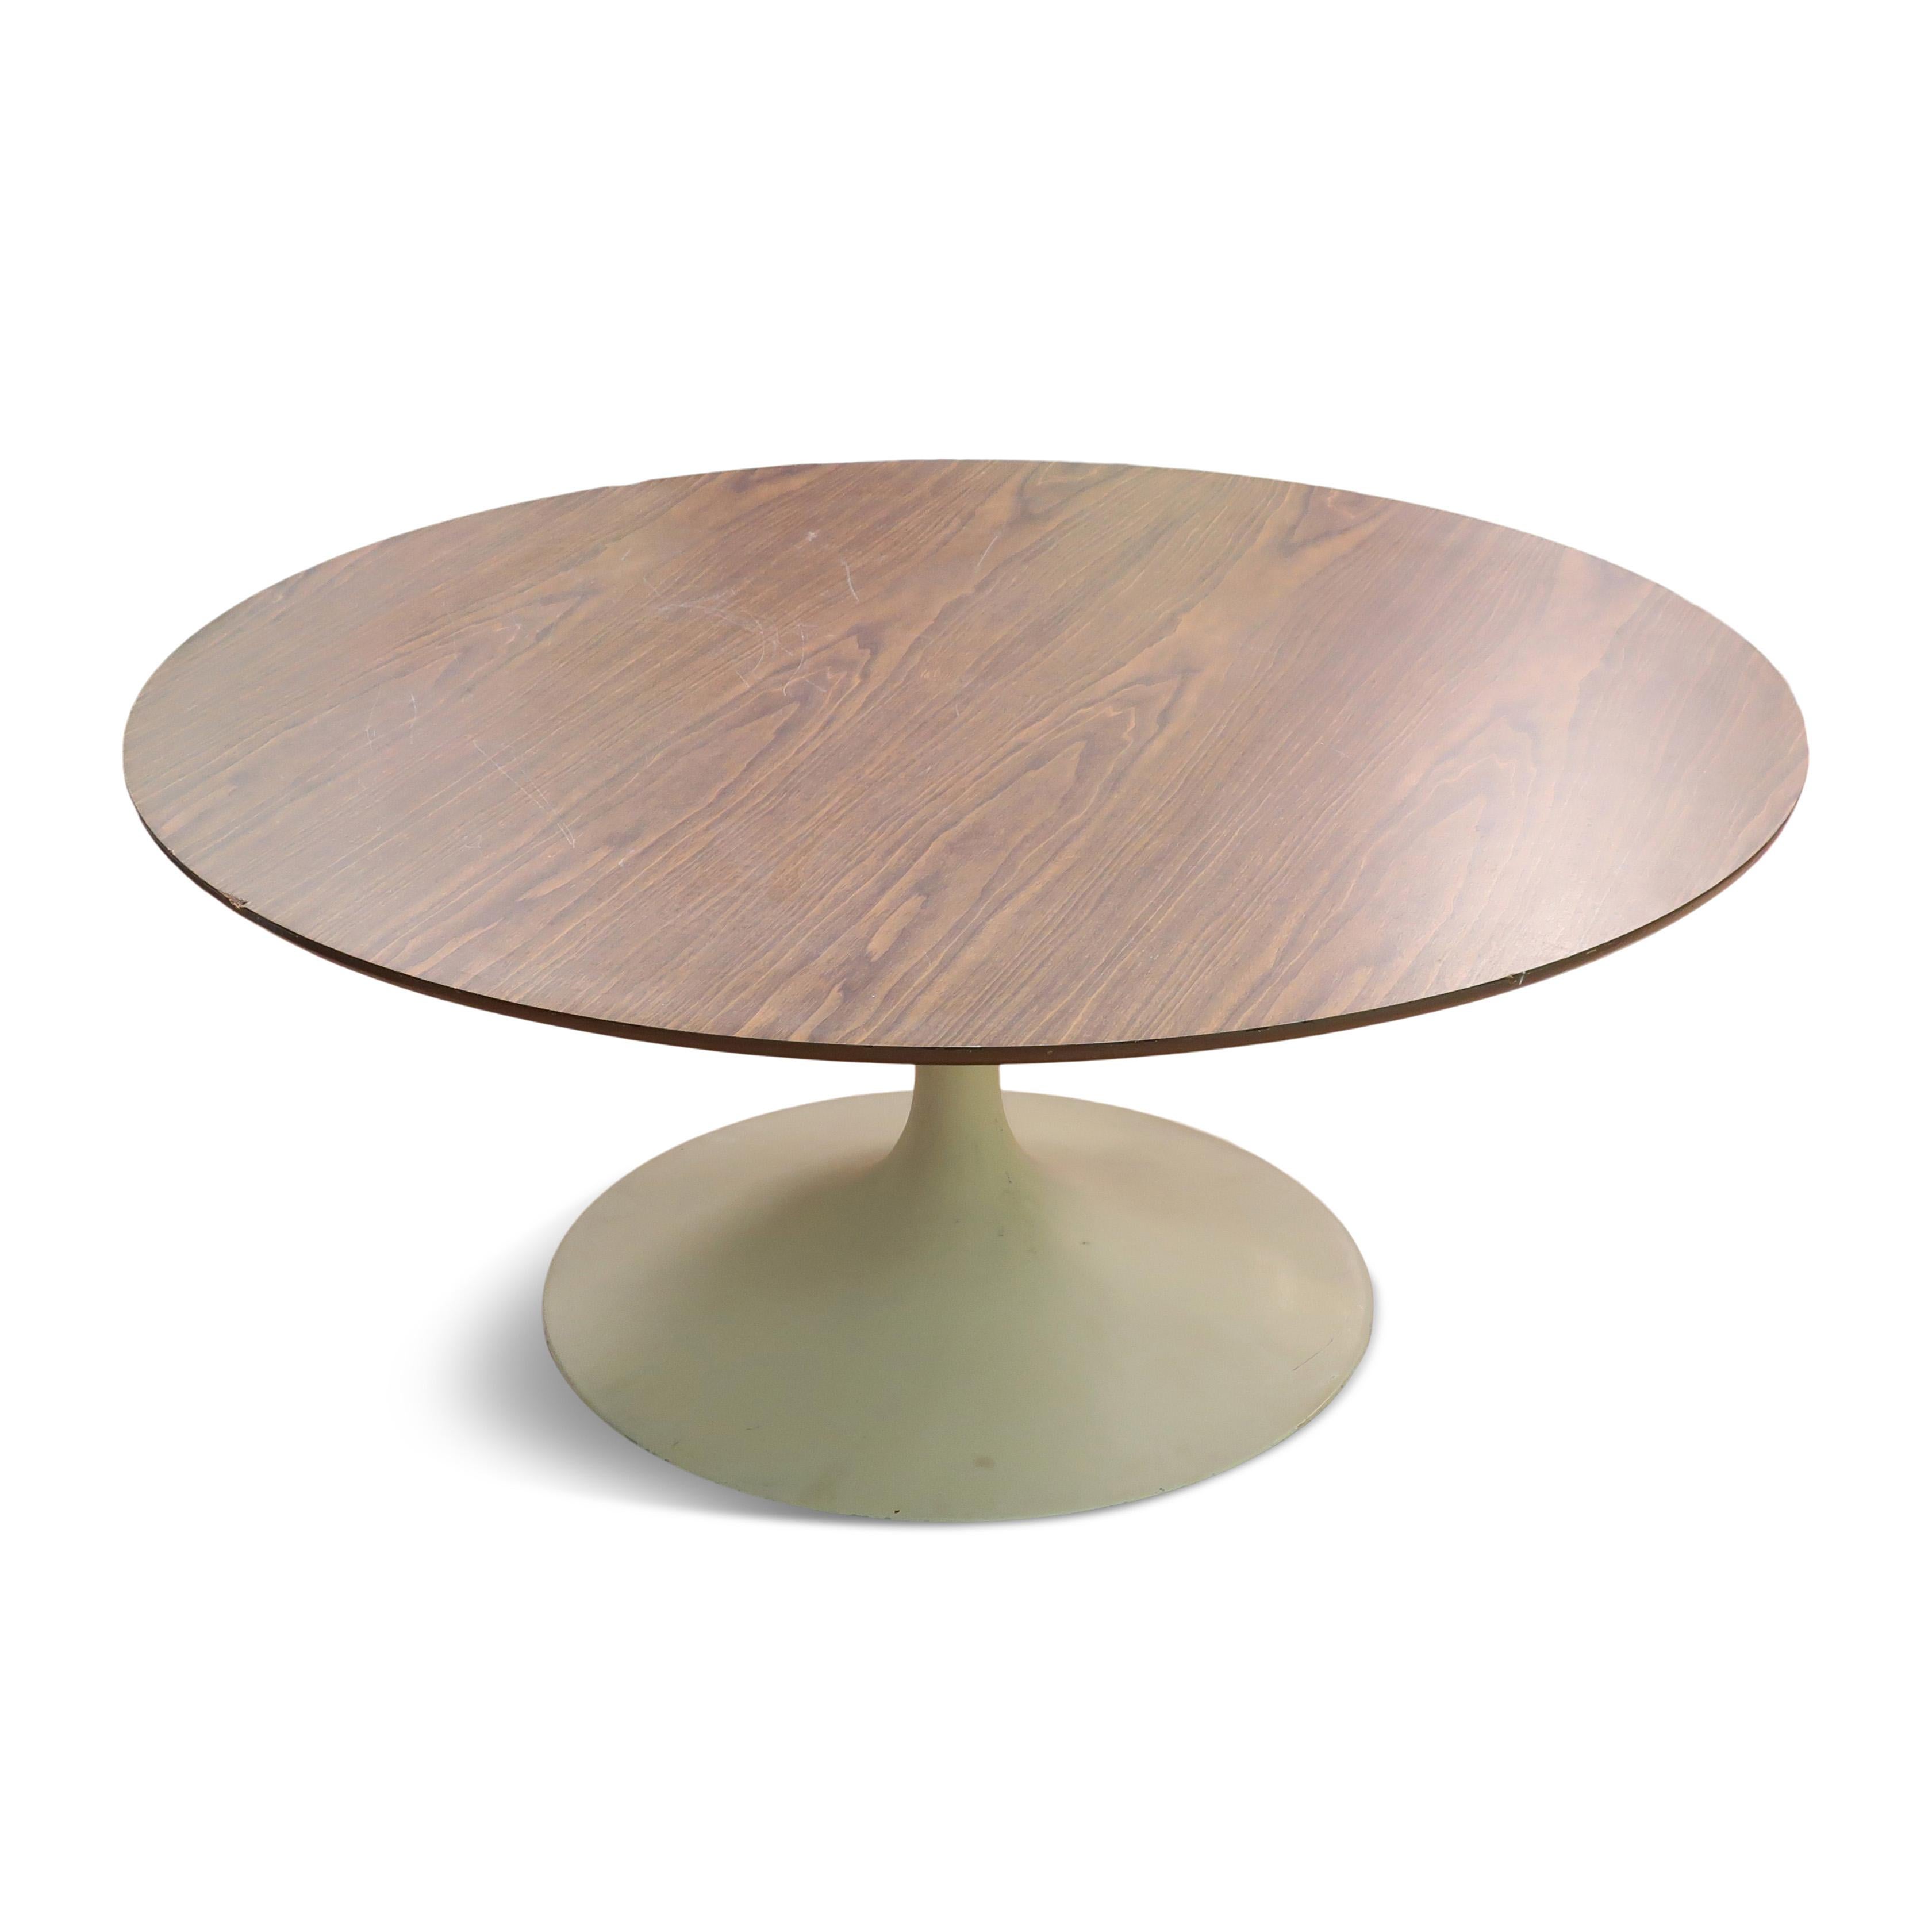 A vintage coffee table by Eero Saarinen for Knoll with white tulip base and laminate top. This icon of mid-century modern design was acquired from the family of the original owner, who purchased it in the 60's. The table top features a beveled edge